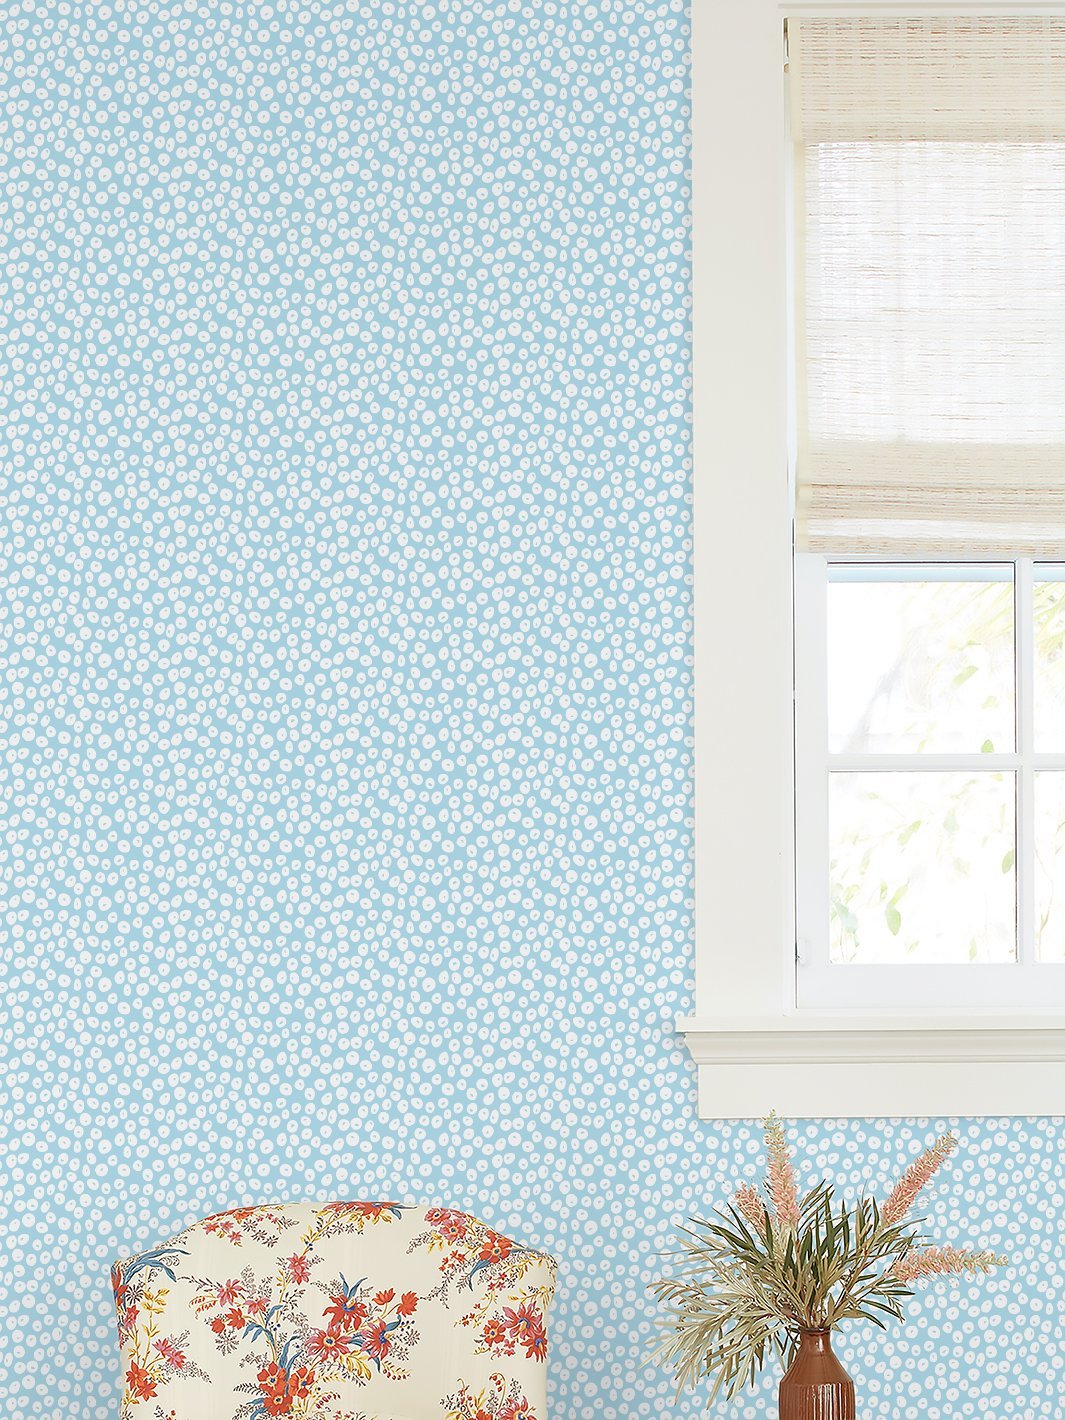 'Parade Dots' Wallpaper by Barbie™ - Baby Blue